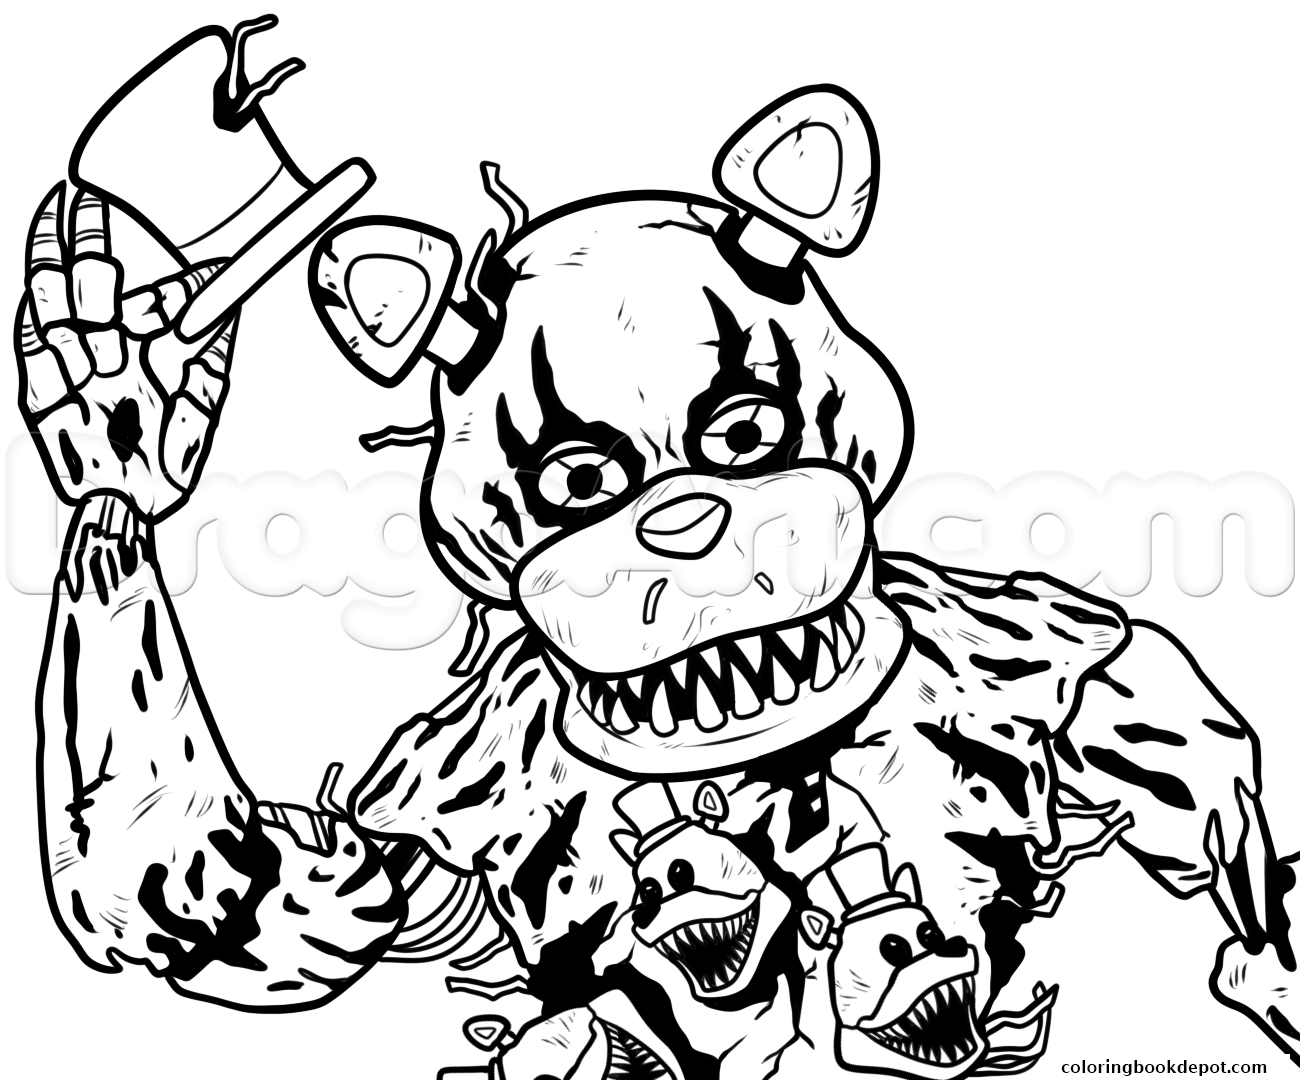 Five Nights At Freddy's Coloring Pages Foxy The Best Free Freddy Coloring Page Images Download From 453 Free